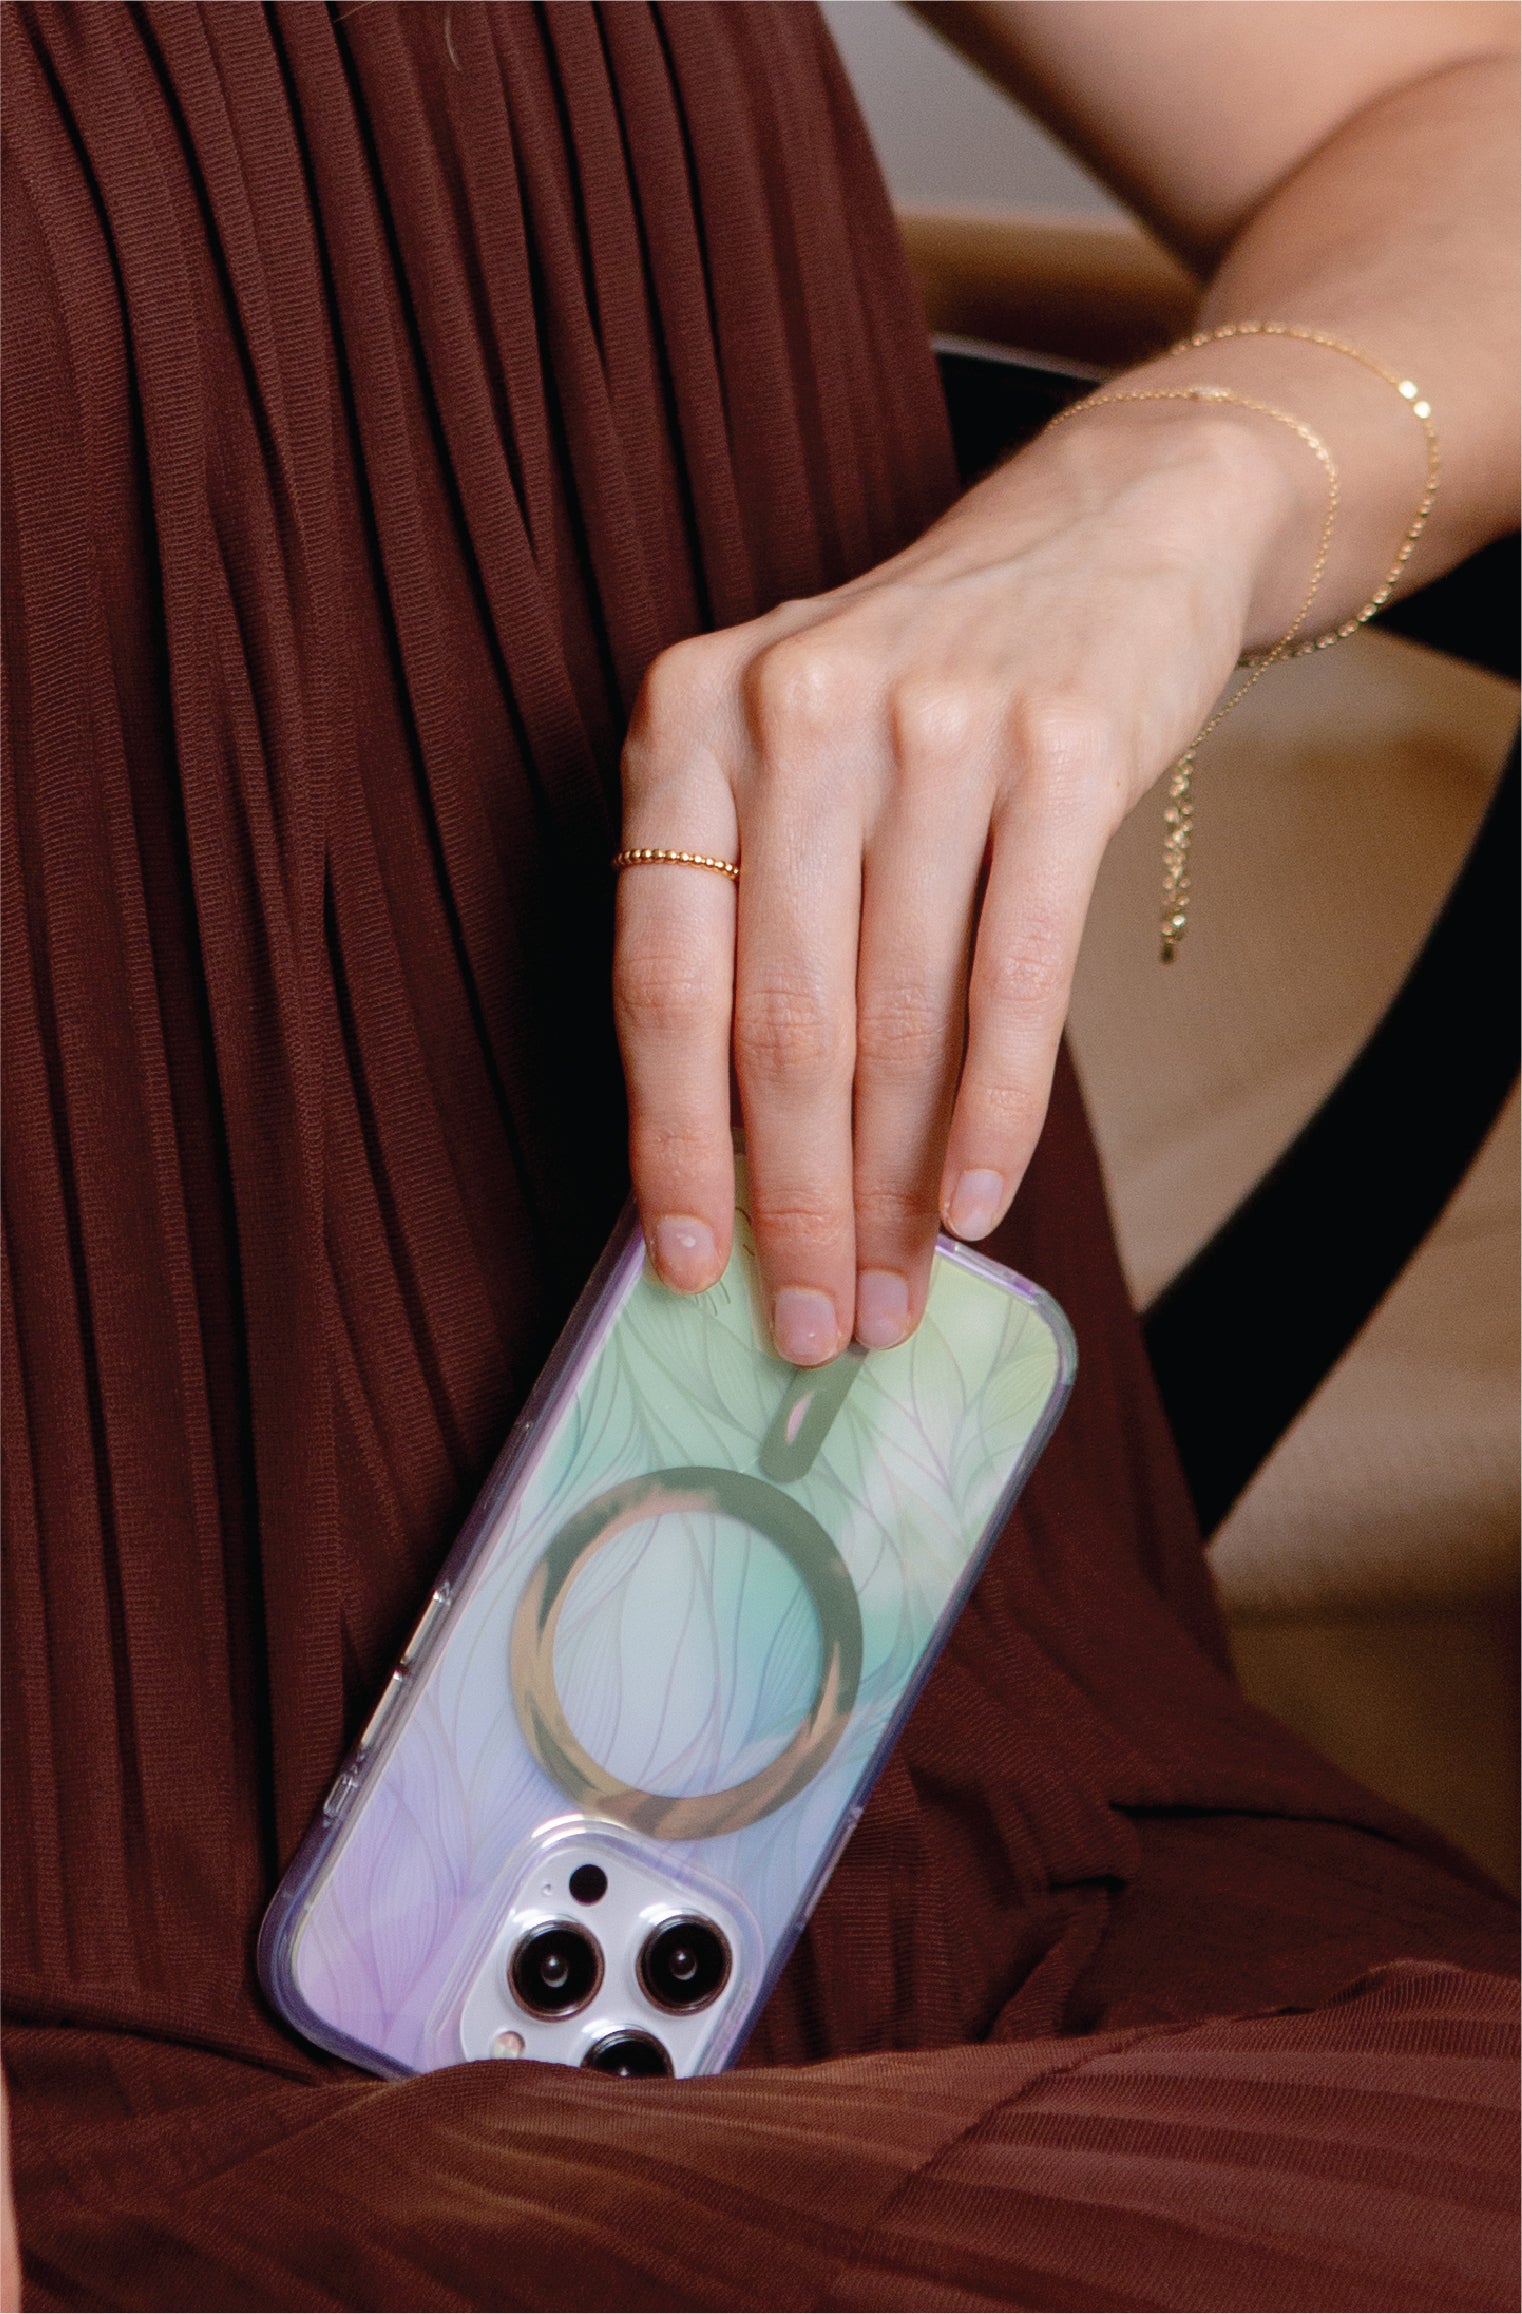 Hand with jewelry holding patterned phone